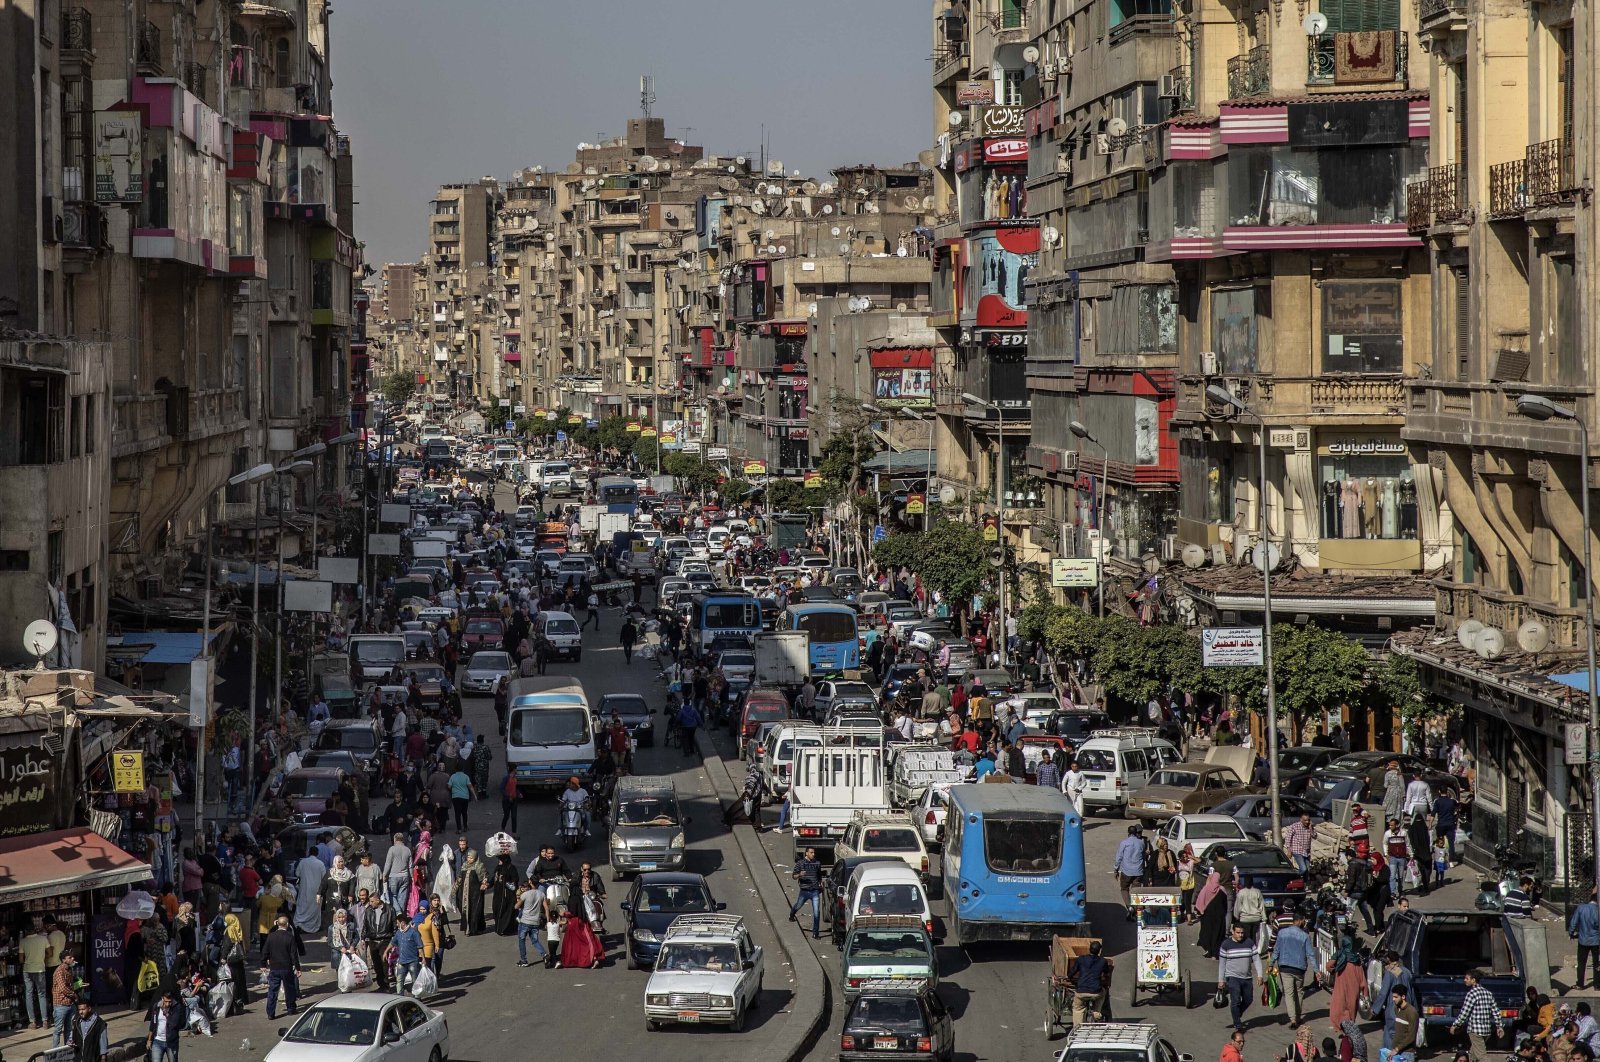 People crowd a street a few hours ahead of curfew in Cairo, Egypt, April 14, 2020. (AP Photo)